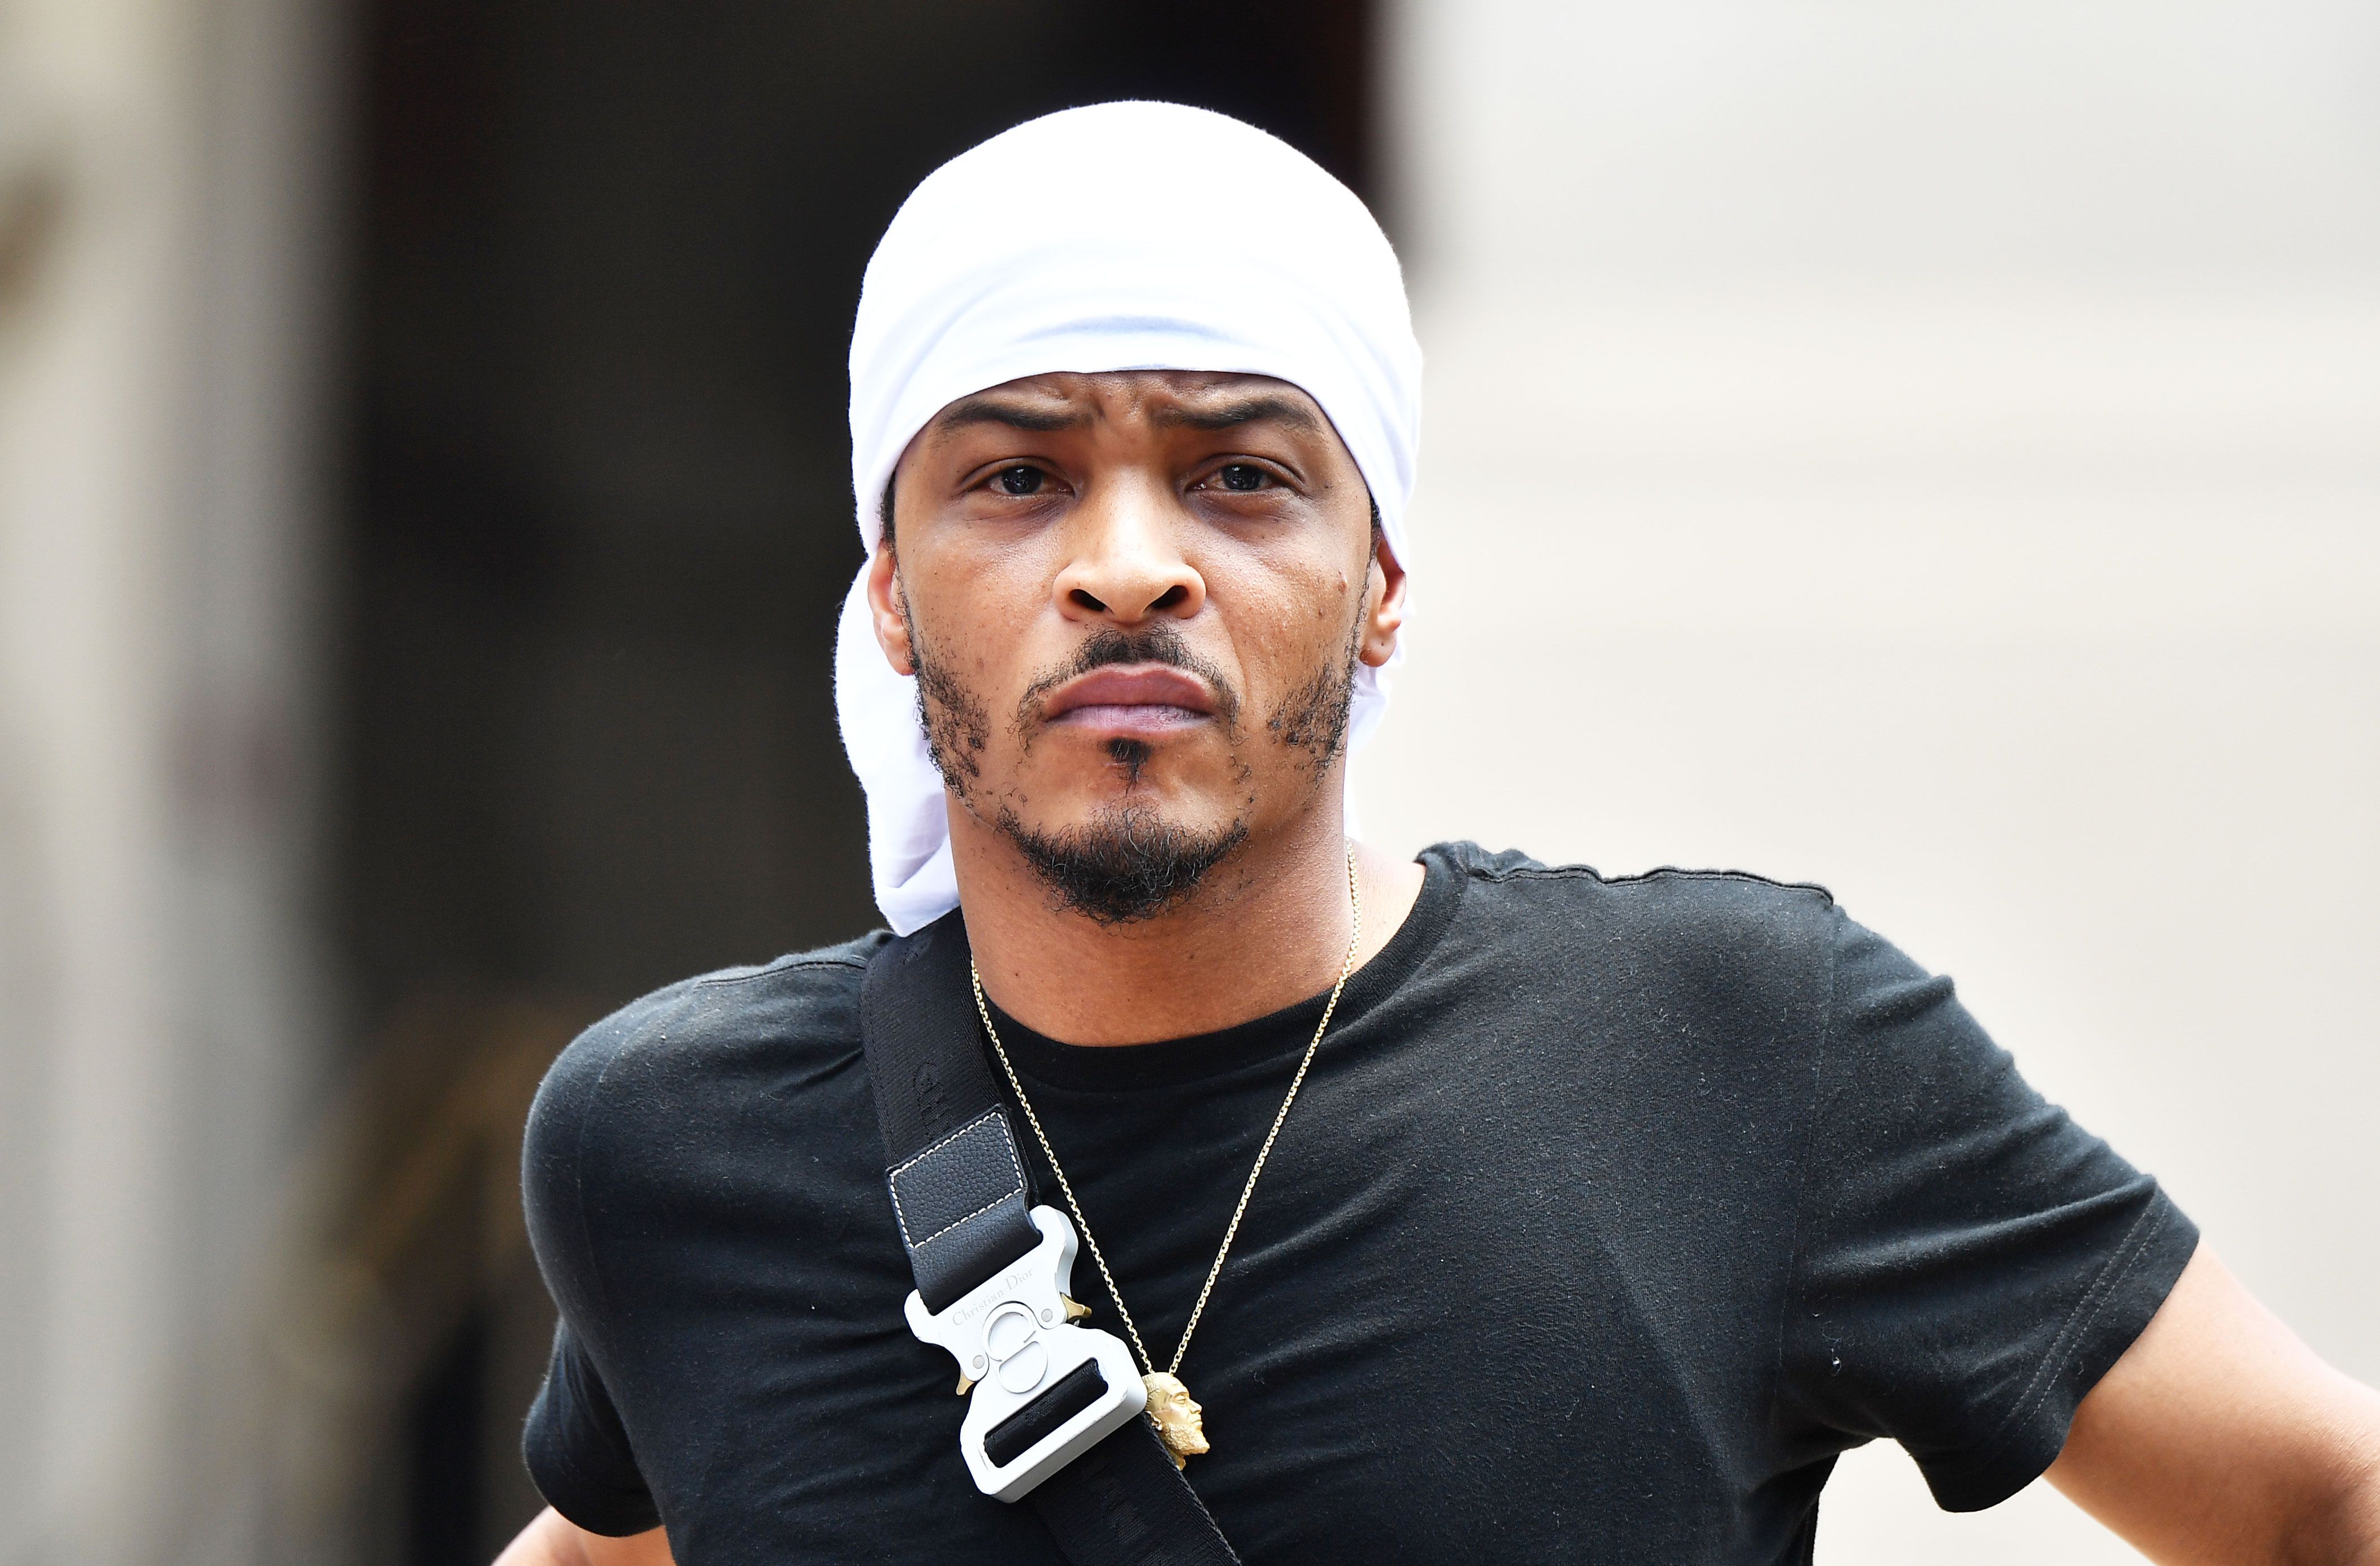 T.I. Settles With SEC Over Promoting 'Fraudulent' ICOs